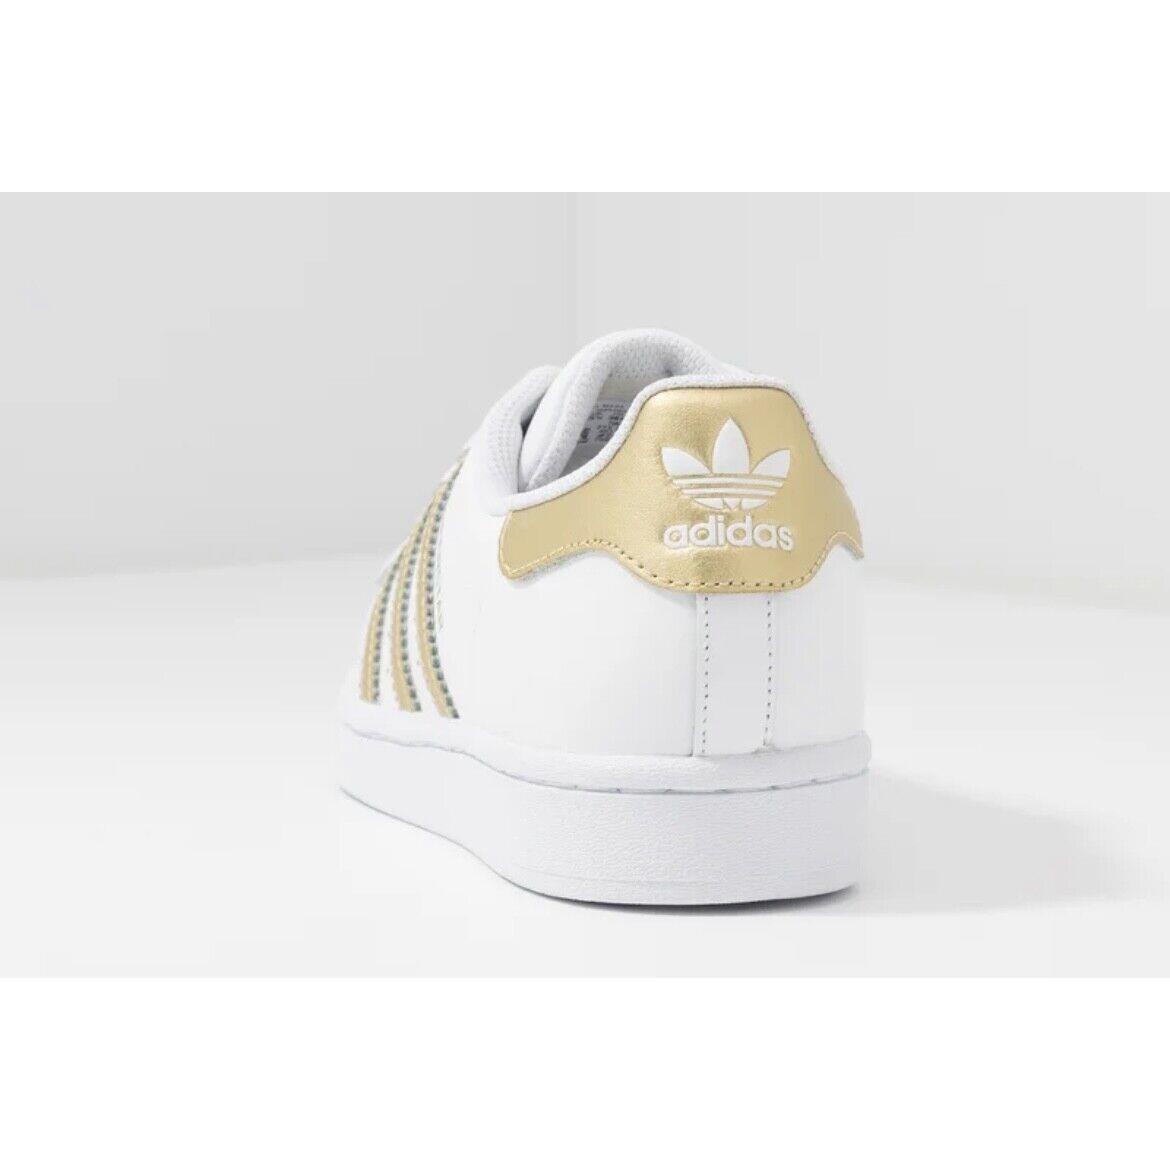 Adidas shoes Superstar - White Gold 4